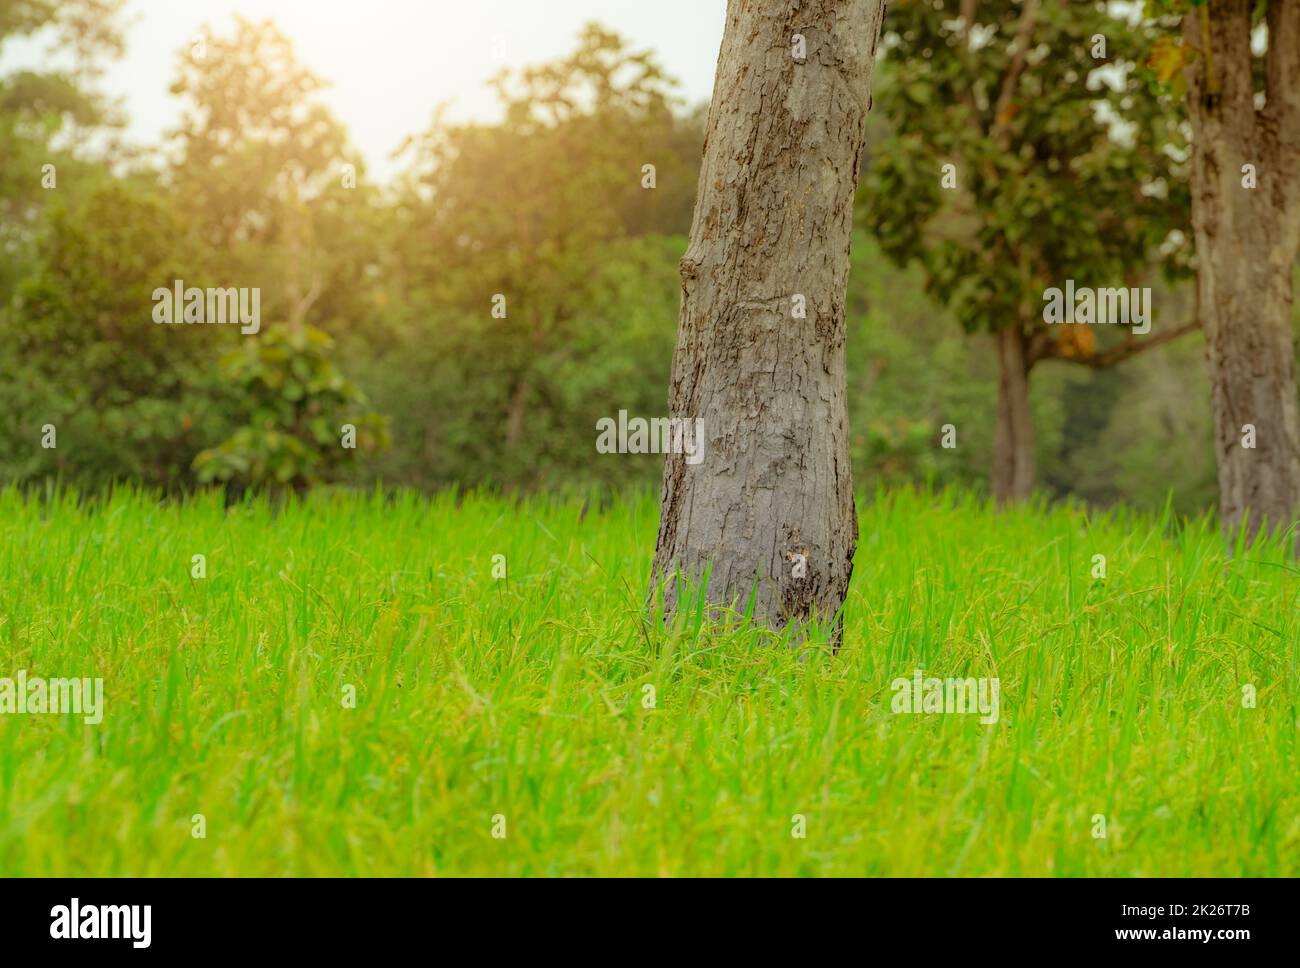 Tree in a rice field in Ubon Ratchathani, Thailand. Rice plantation. Green rice paddy field. Organic rice farm in Asia. Agricultural farm near the forest in rural. Sustainable agriculture. Stock Photo